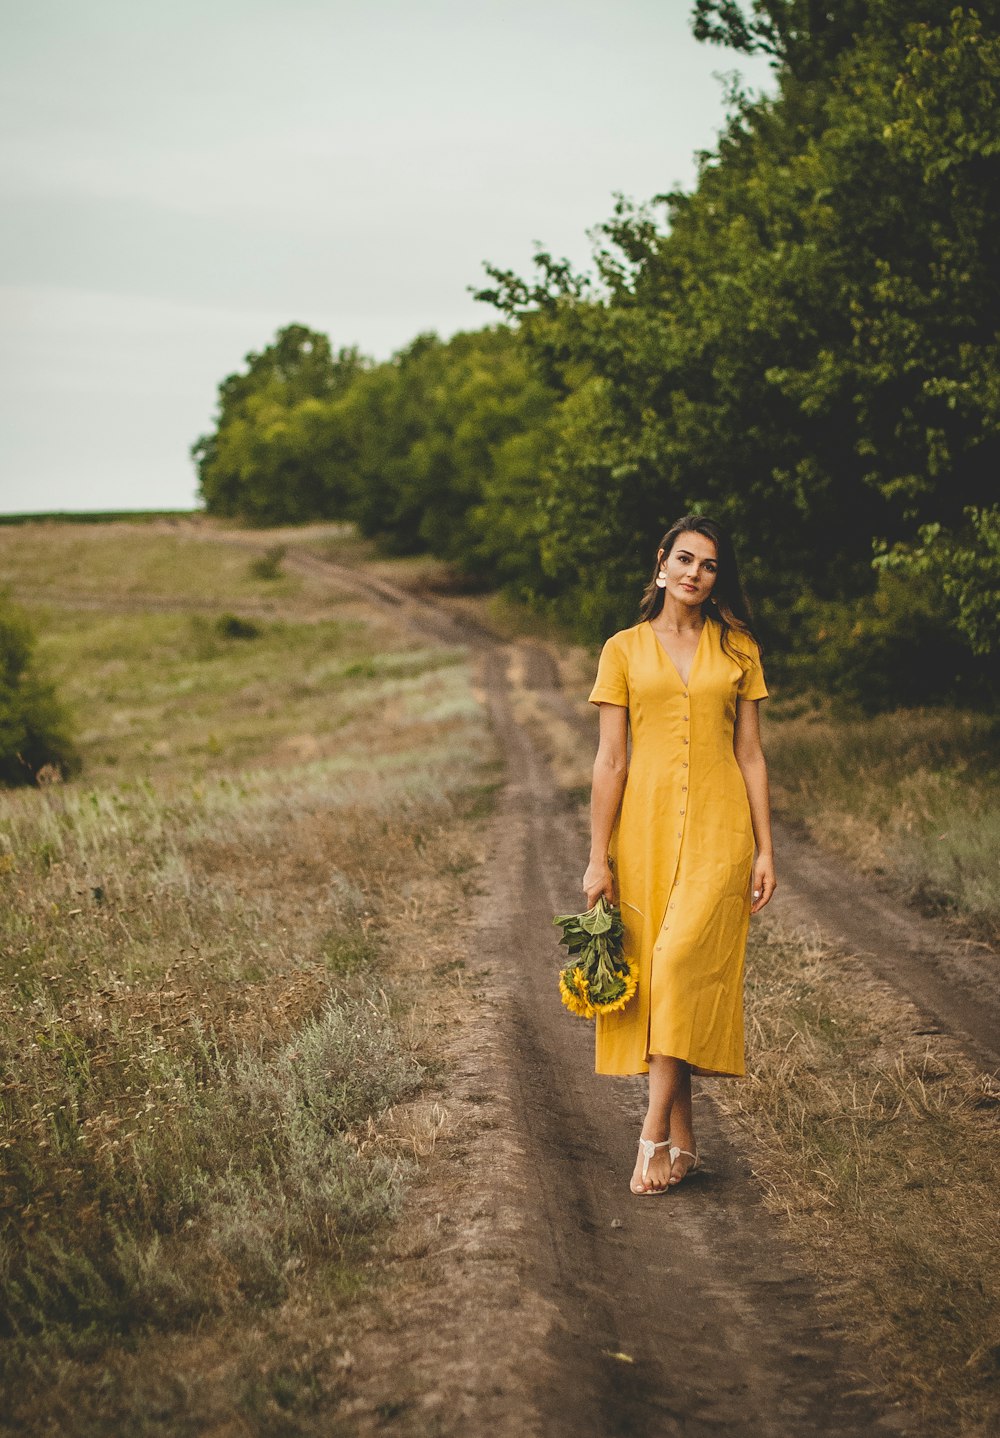 woman in yellow long sleeve dress standing on brown dirt road during daytime